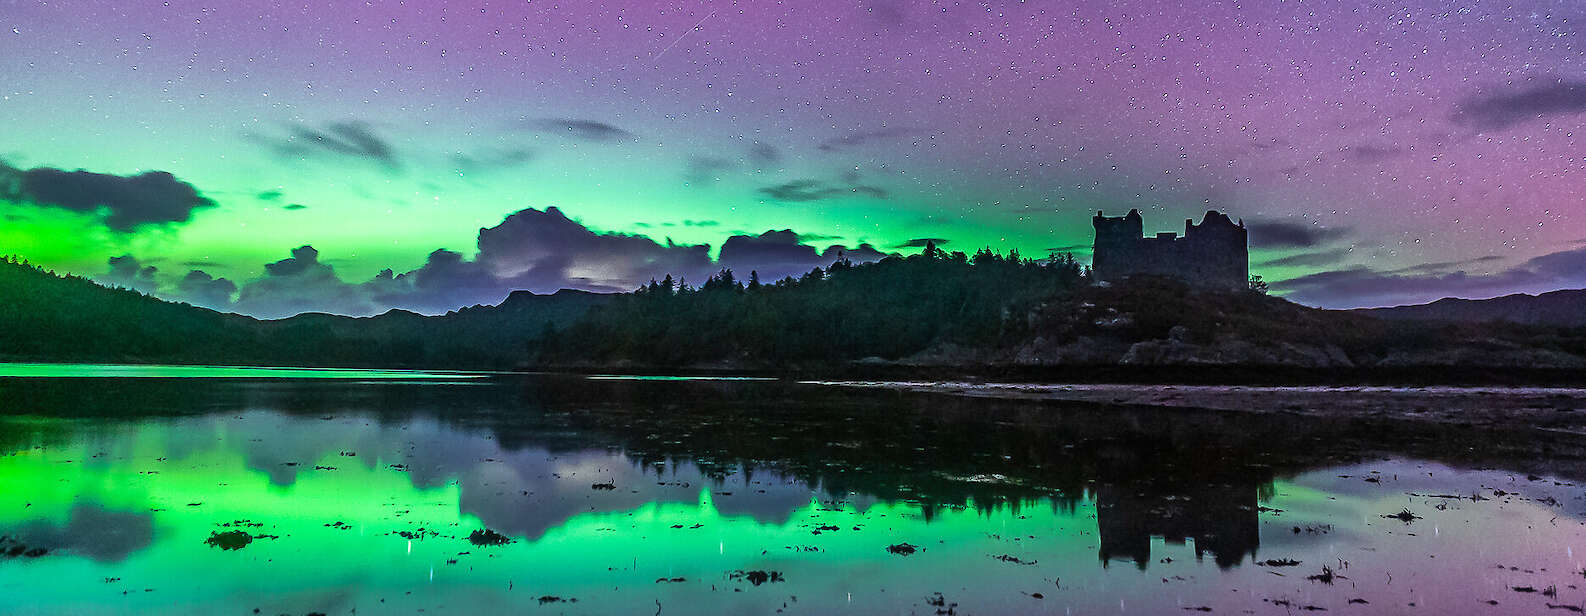 Castle Tioram Northern Lights | Courtesy of Steven Marshall Photography - www.smarshall-photography.com